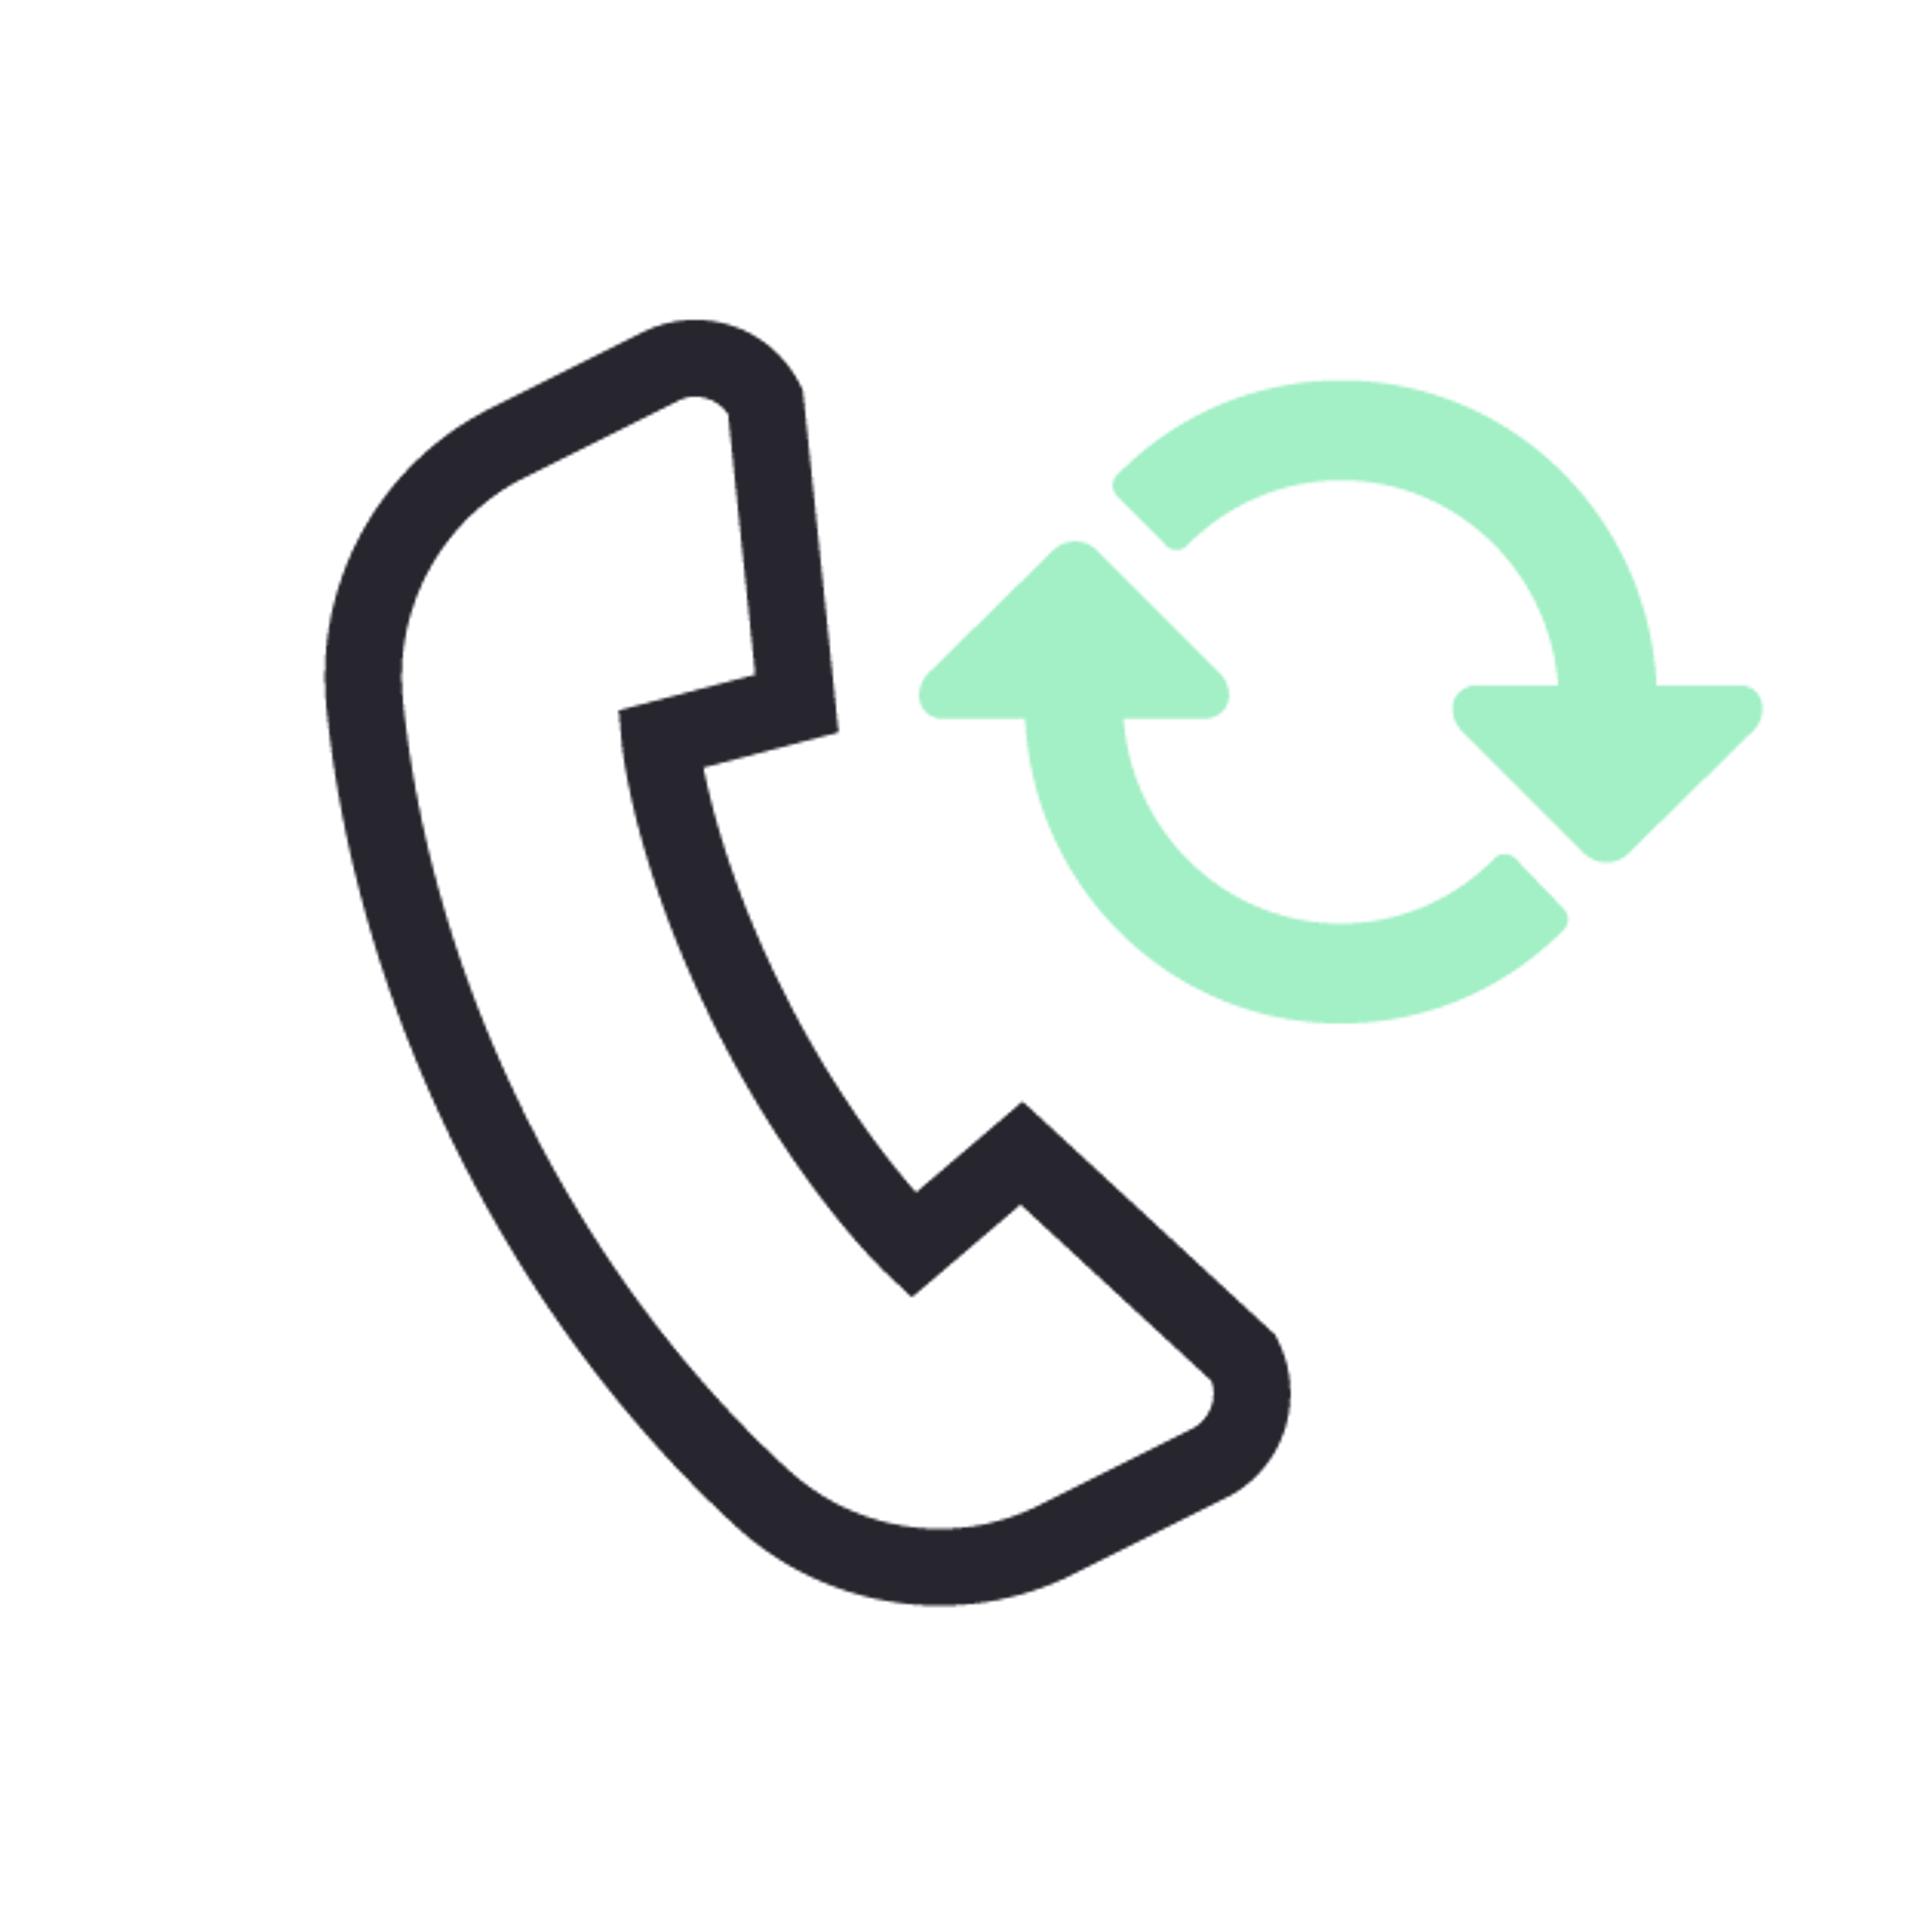 Telephone with a recycle symbol